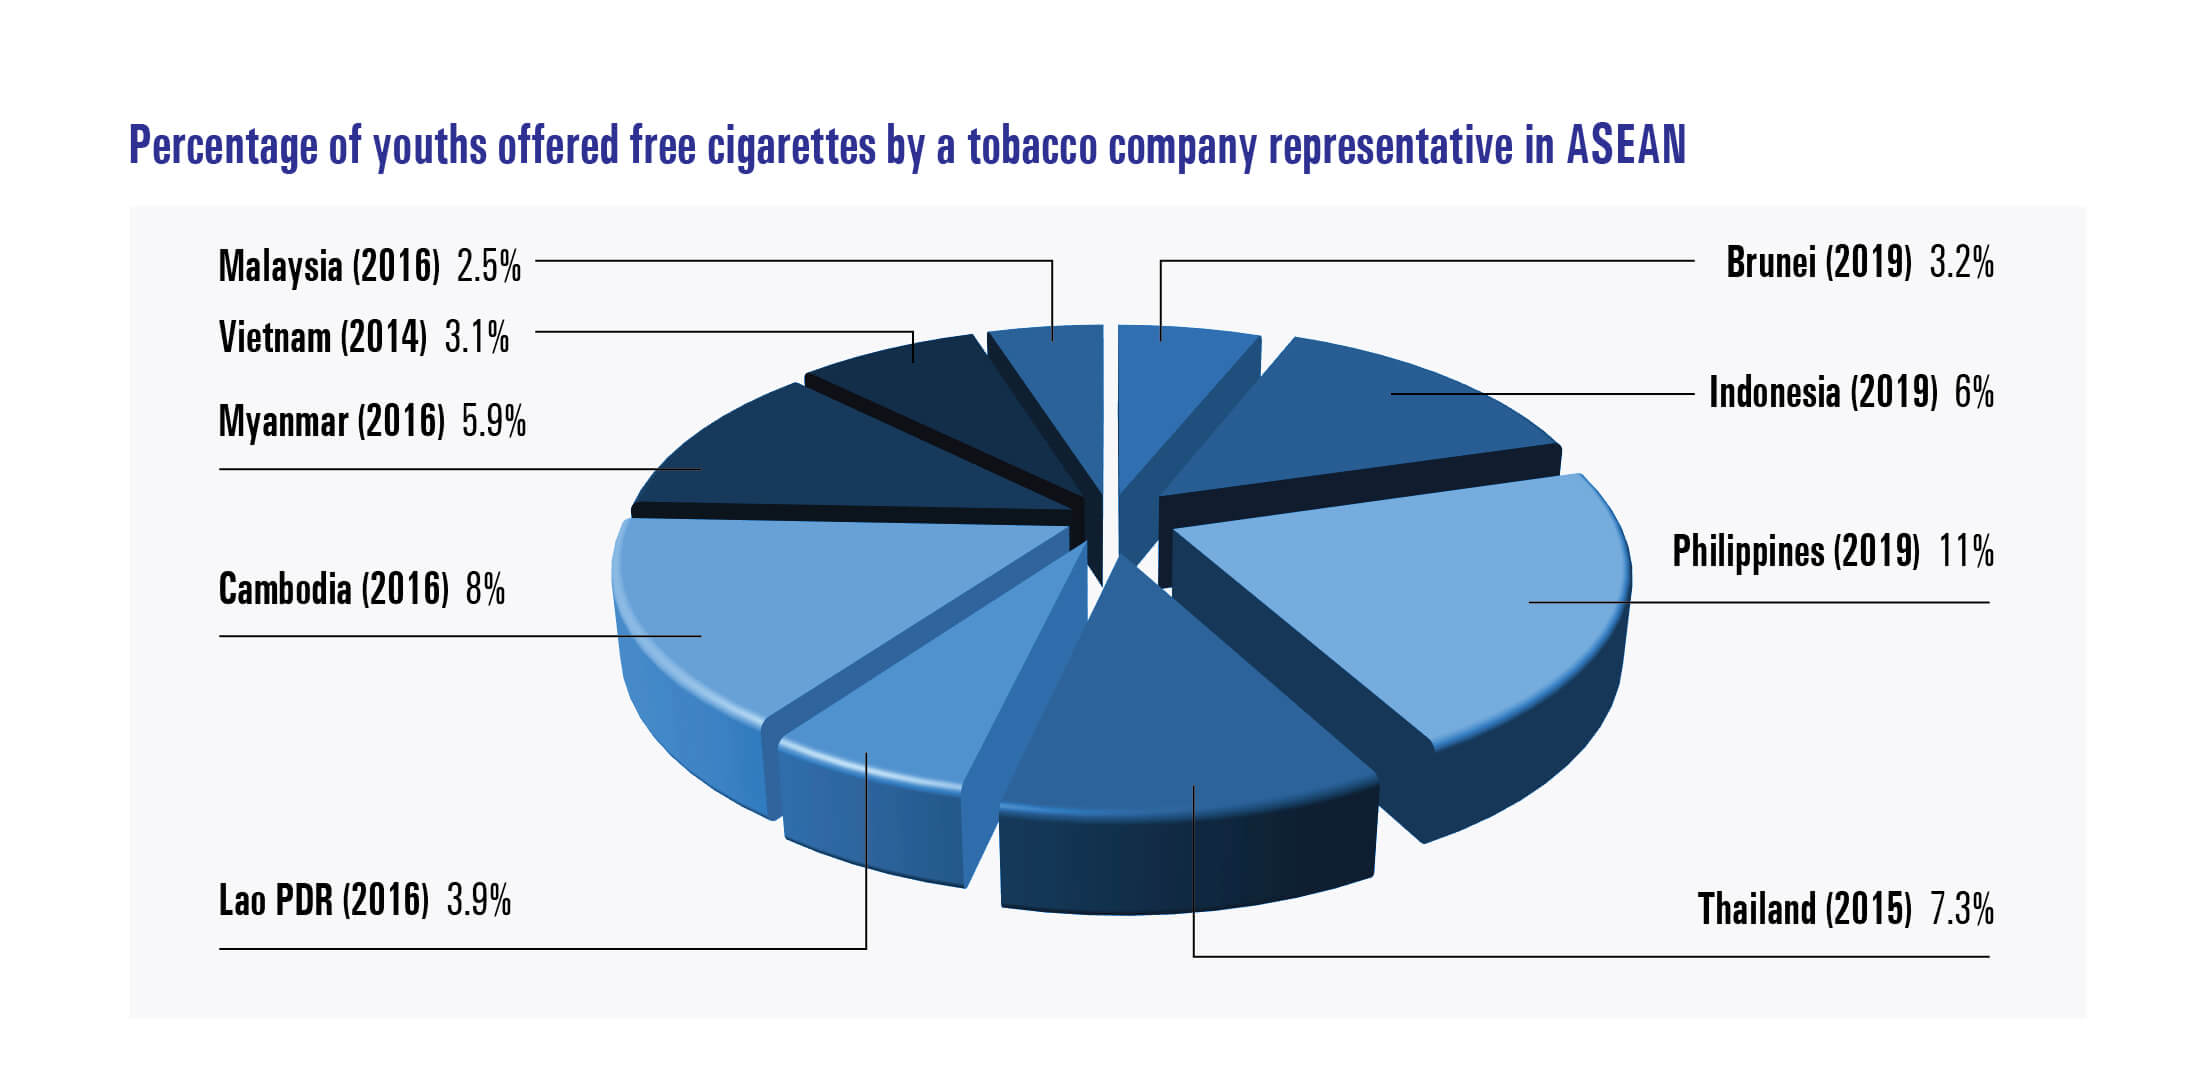 Percentage of youths offered free cigarettes by a tobacco company representative in ASEAN